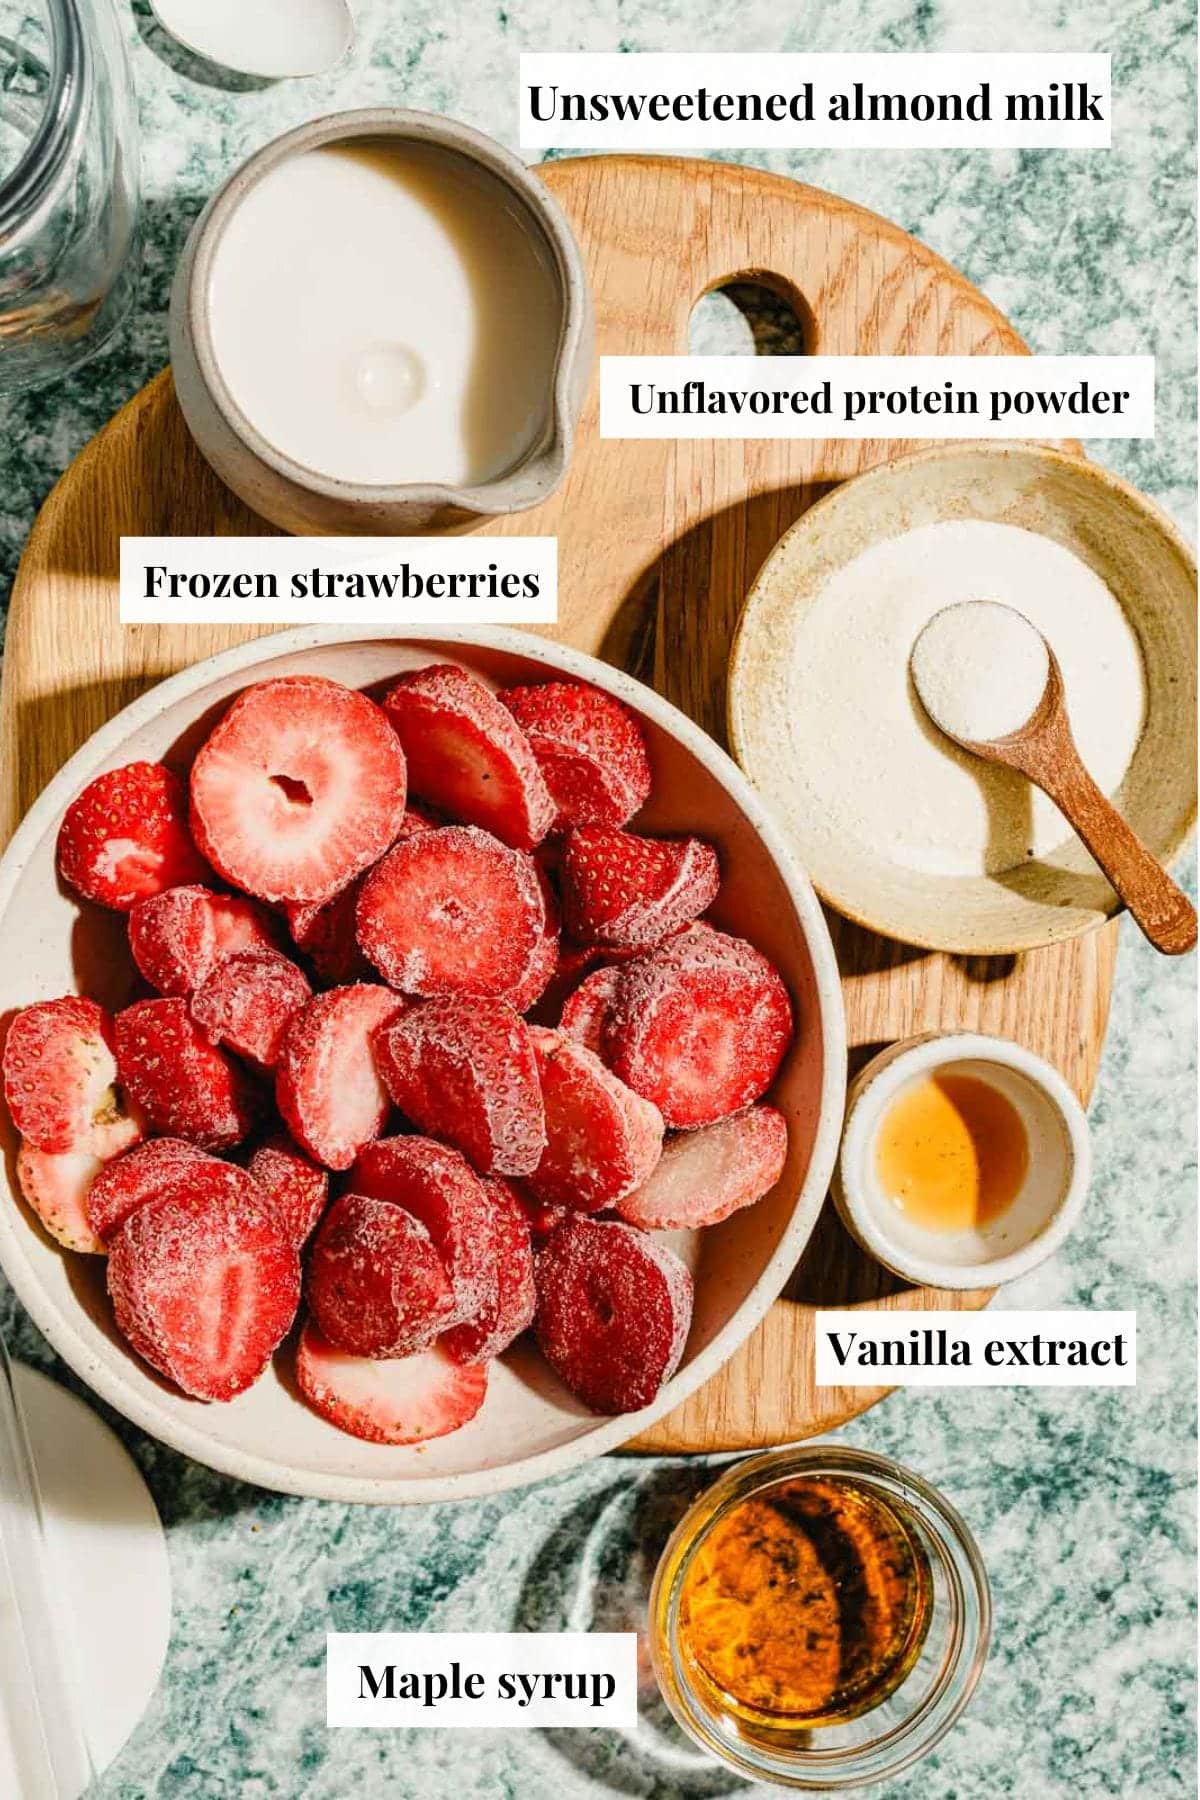 Image shows ingredients used to make homemade strawberry milk.